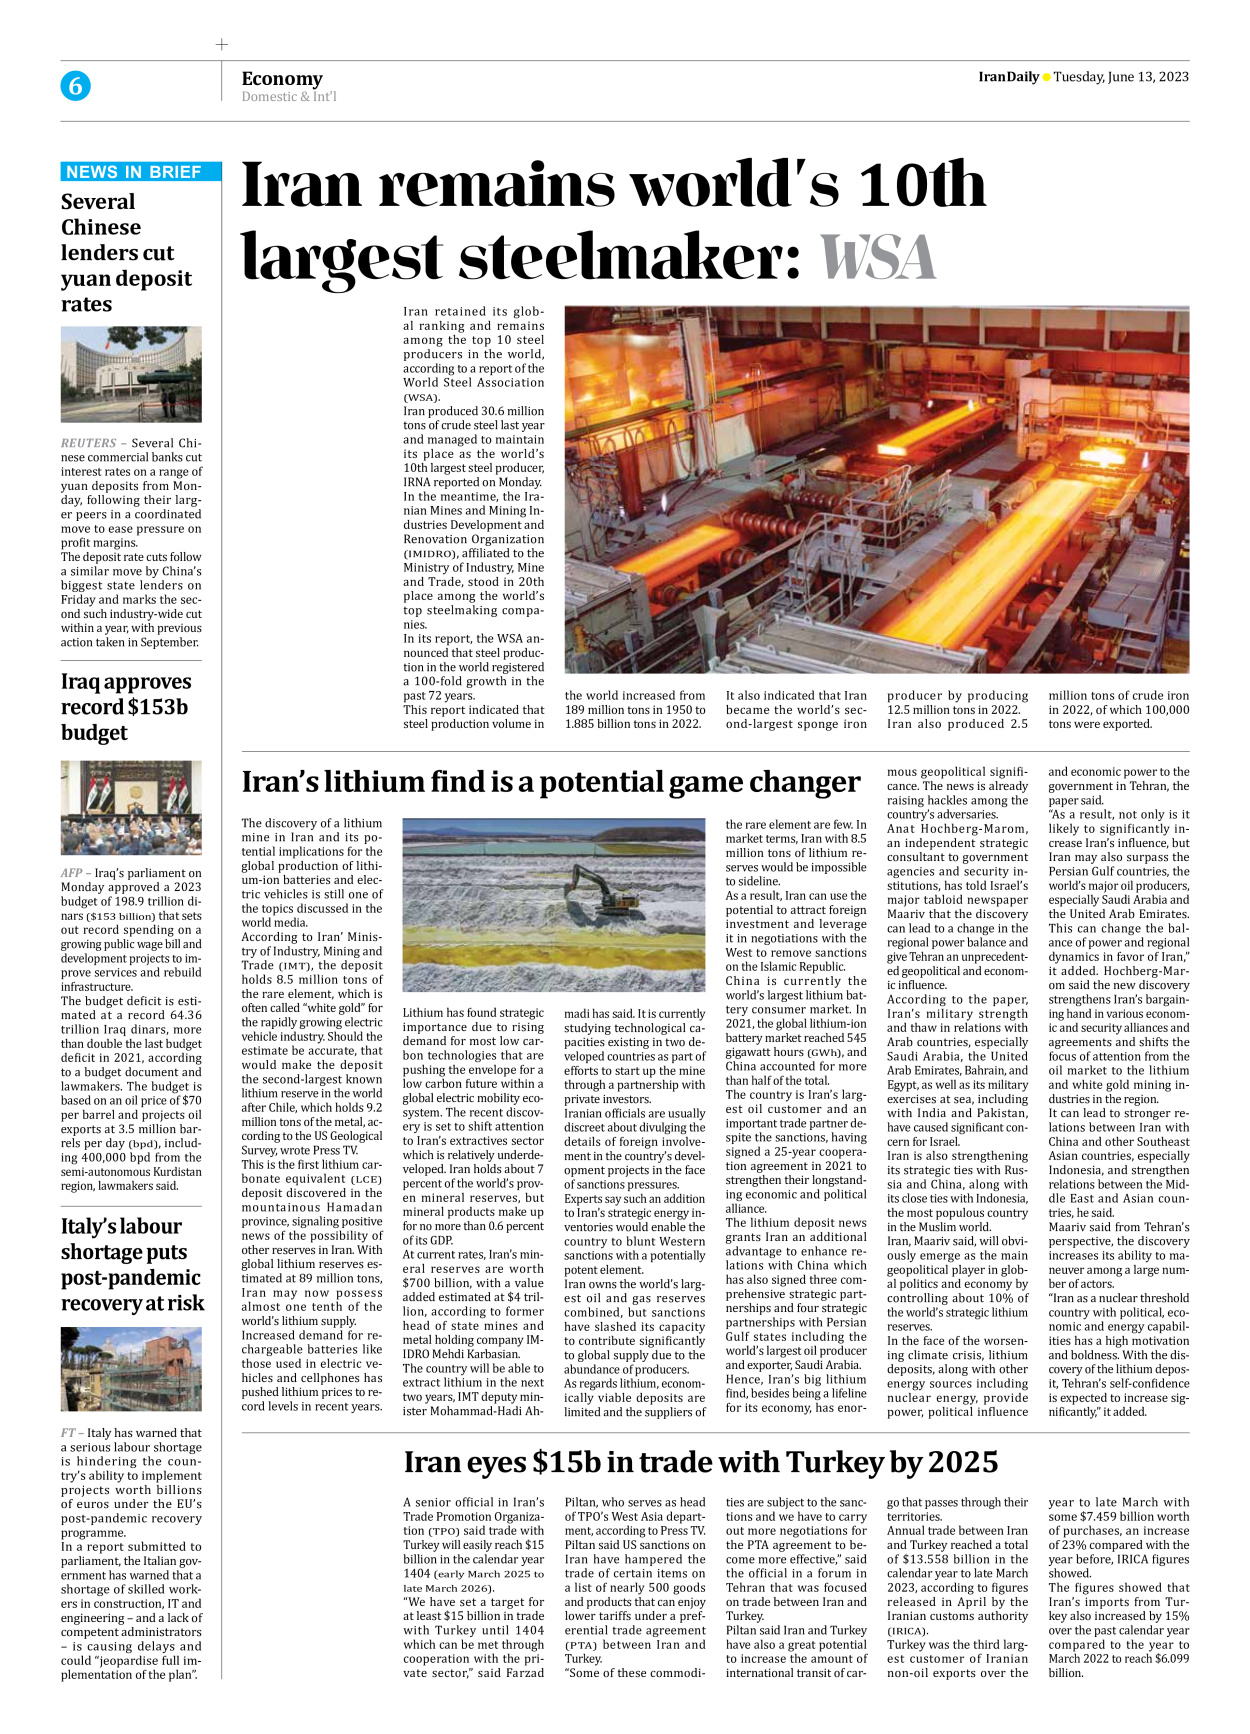 Iran Daily - Number Seven Thousand Three Hundred and Thirteen - 13 June 2023 - Page 6